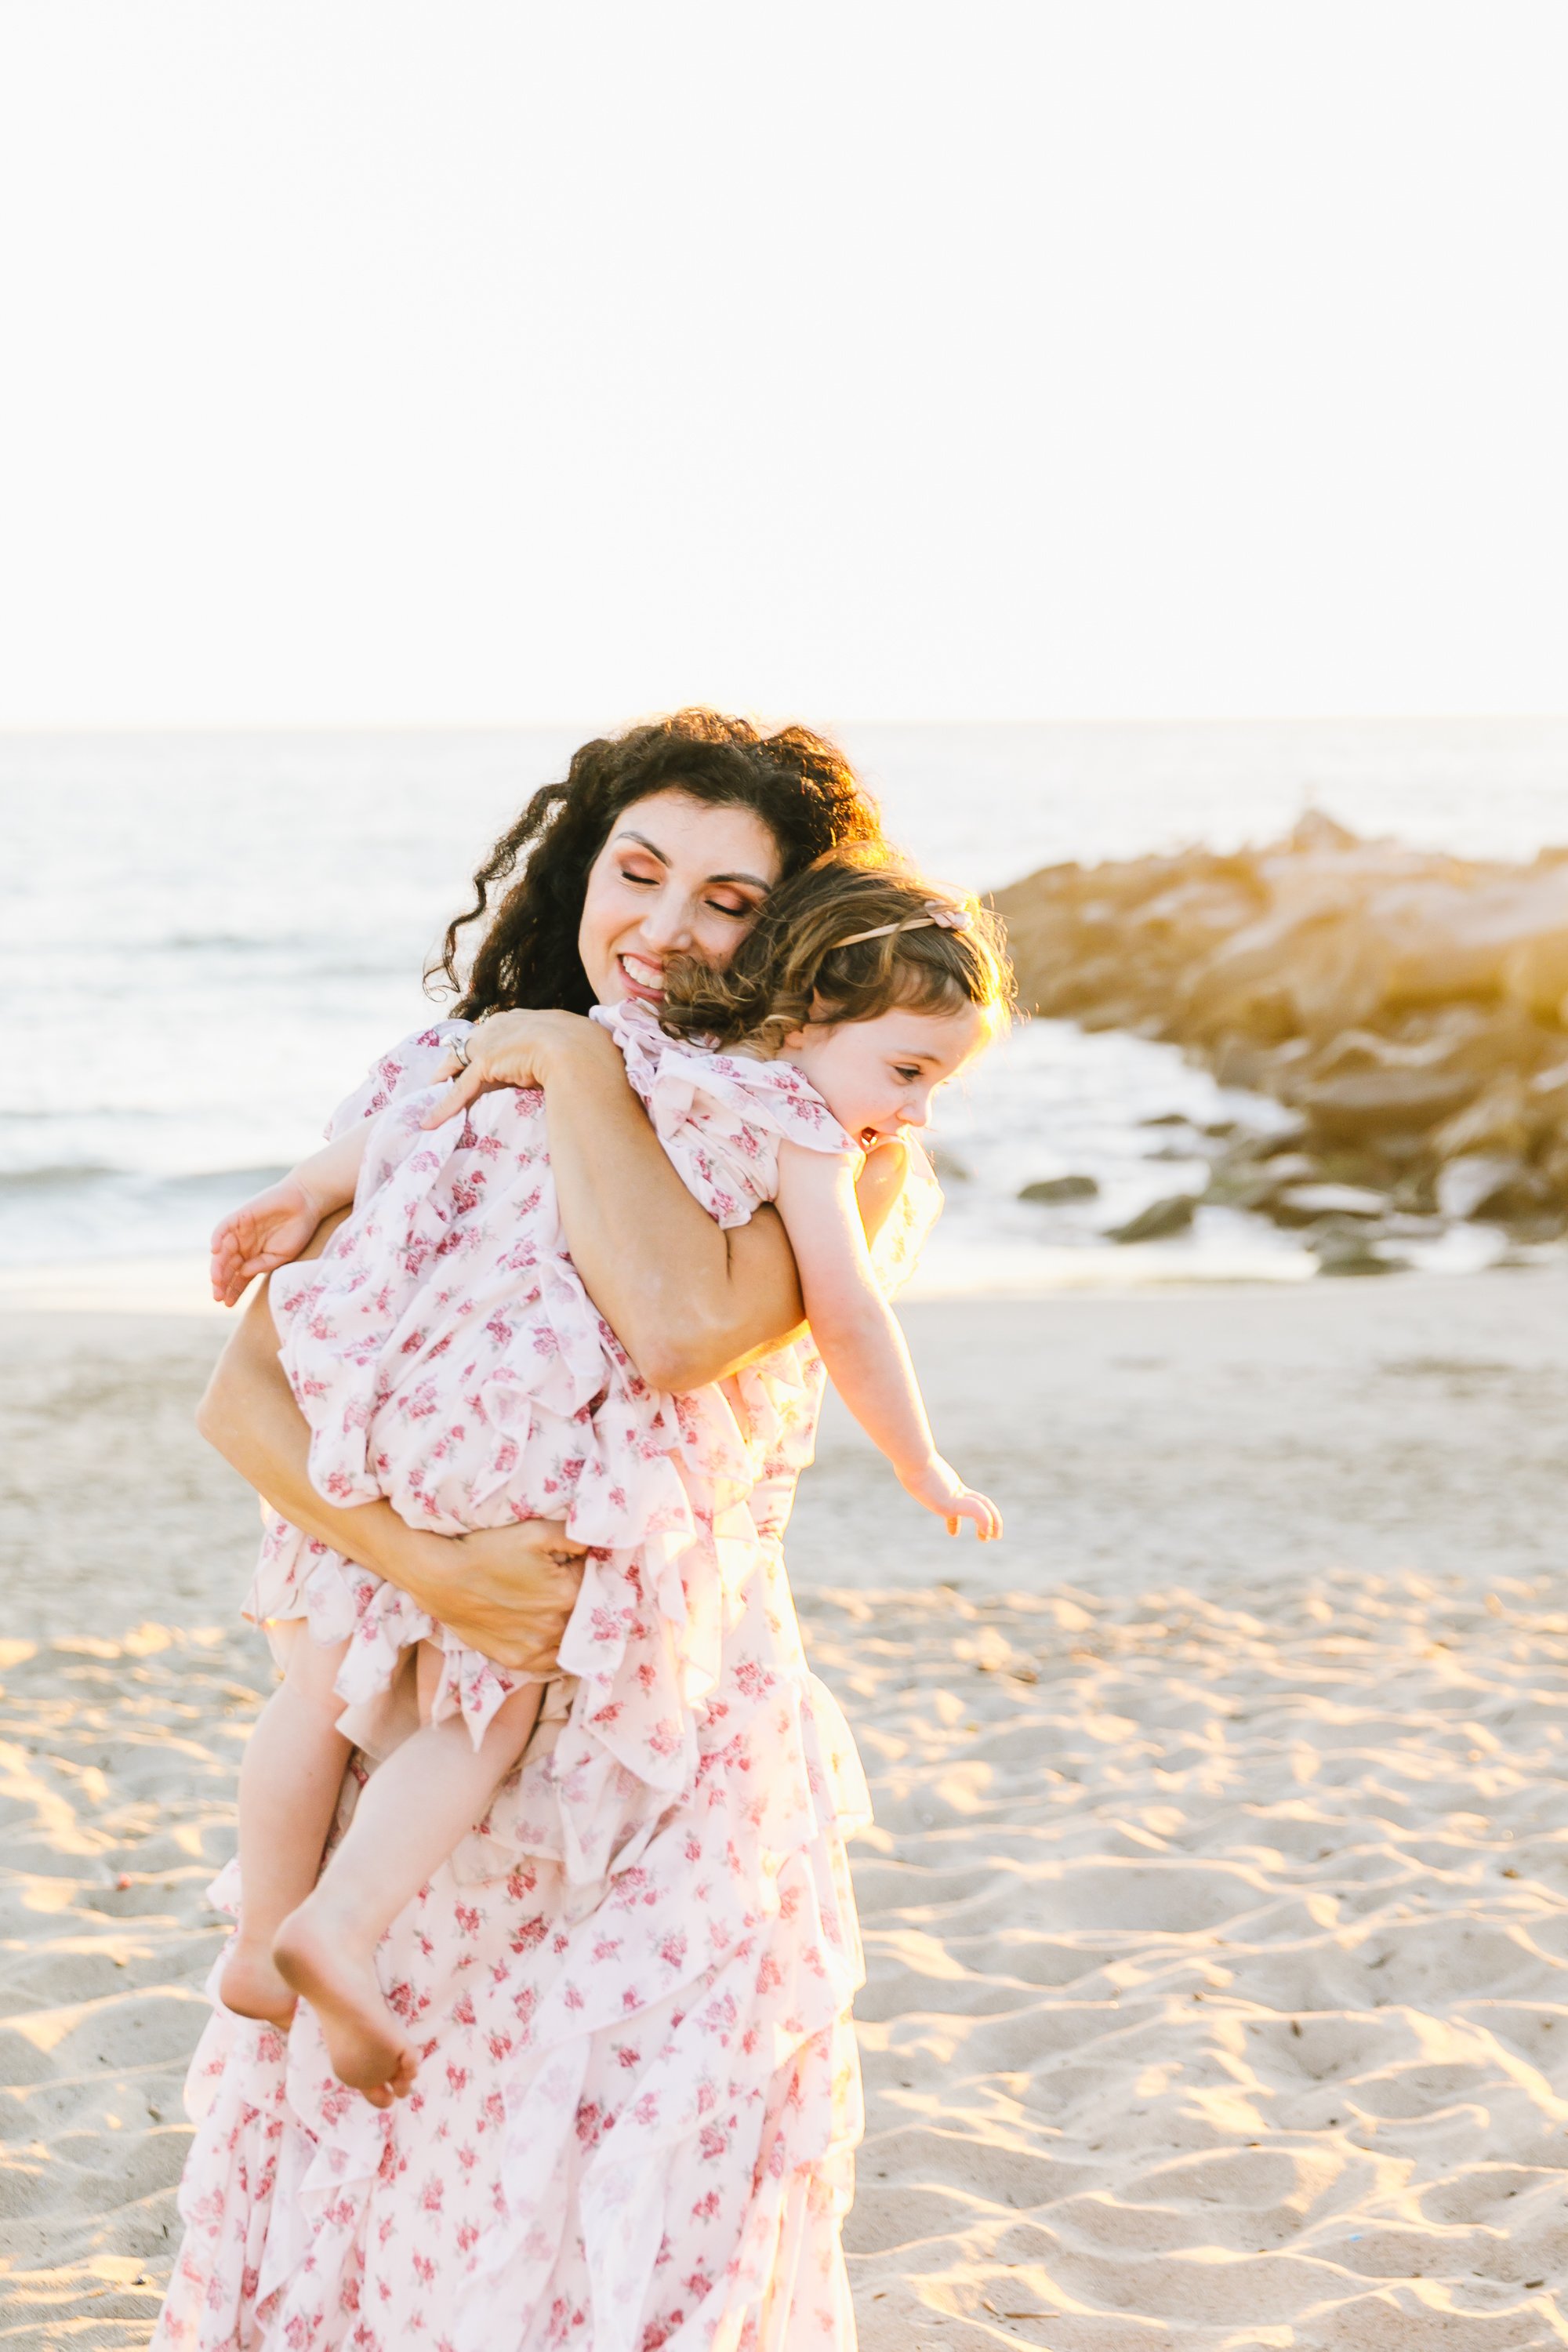 Los_Angeles_Family_Photographer_Mini_session_Golden_hour_Beach_Kid_Maternity_baby_Children_Holiday_Photography-2431.jpg